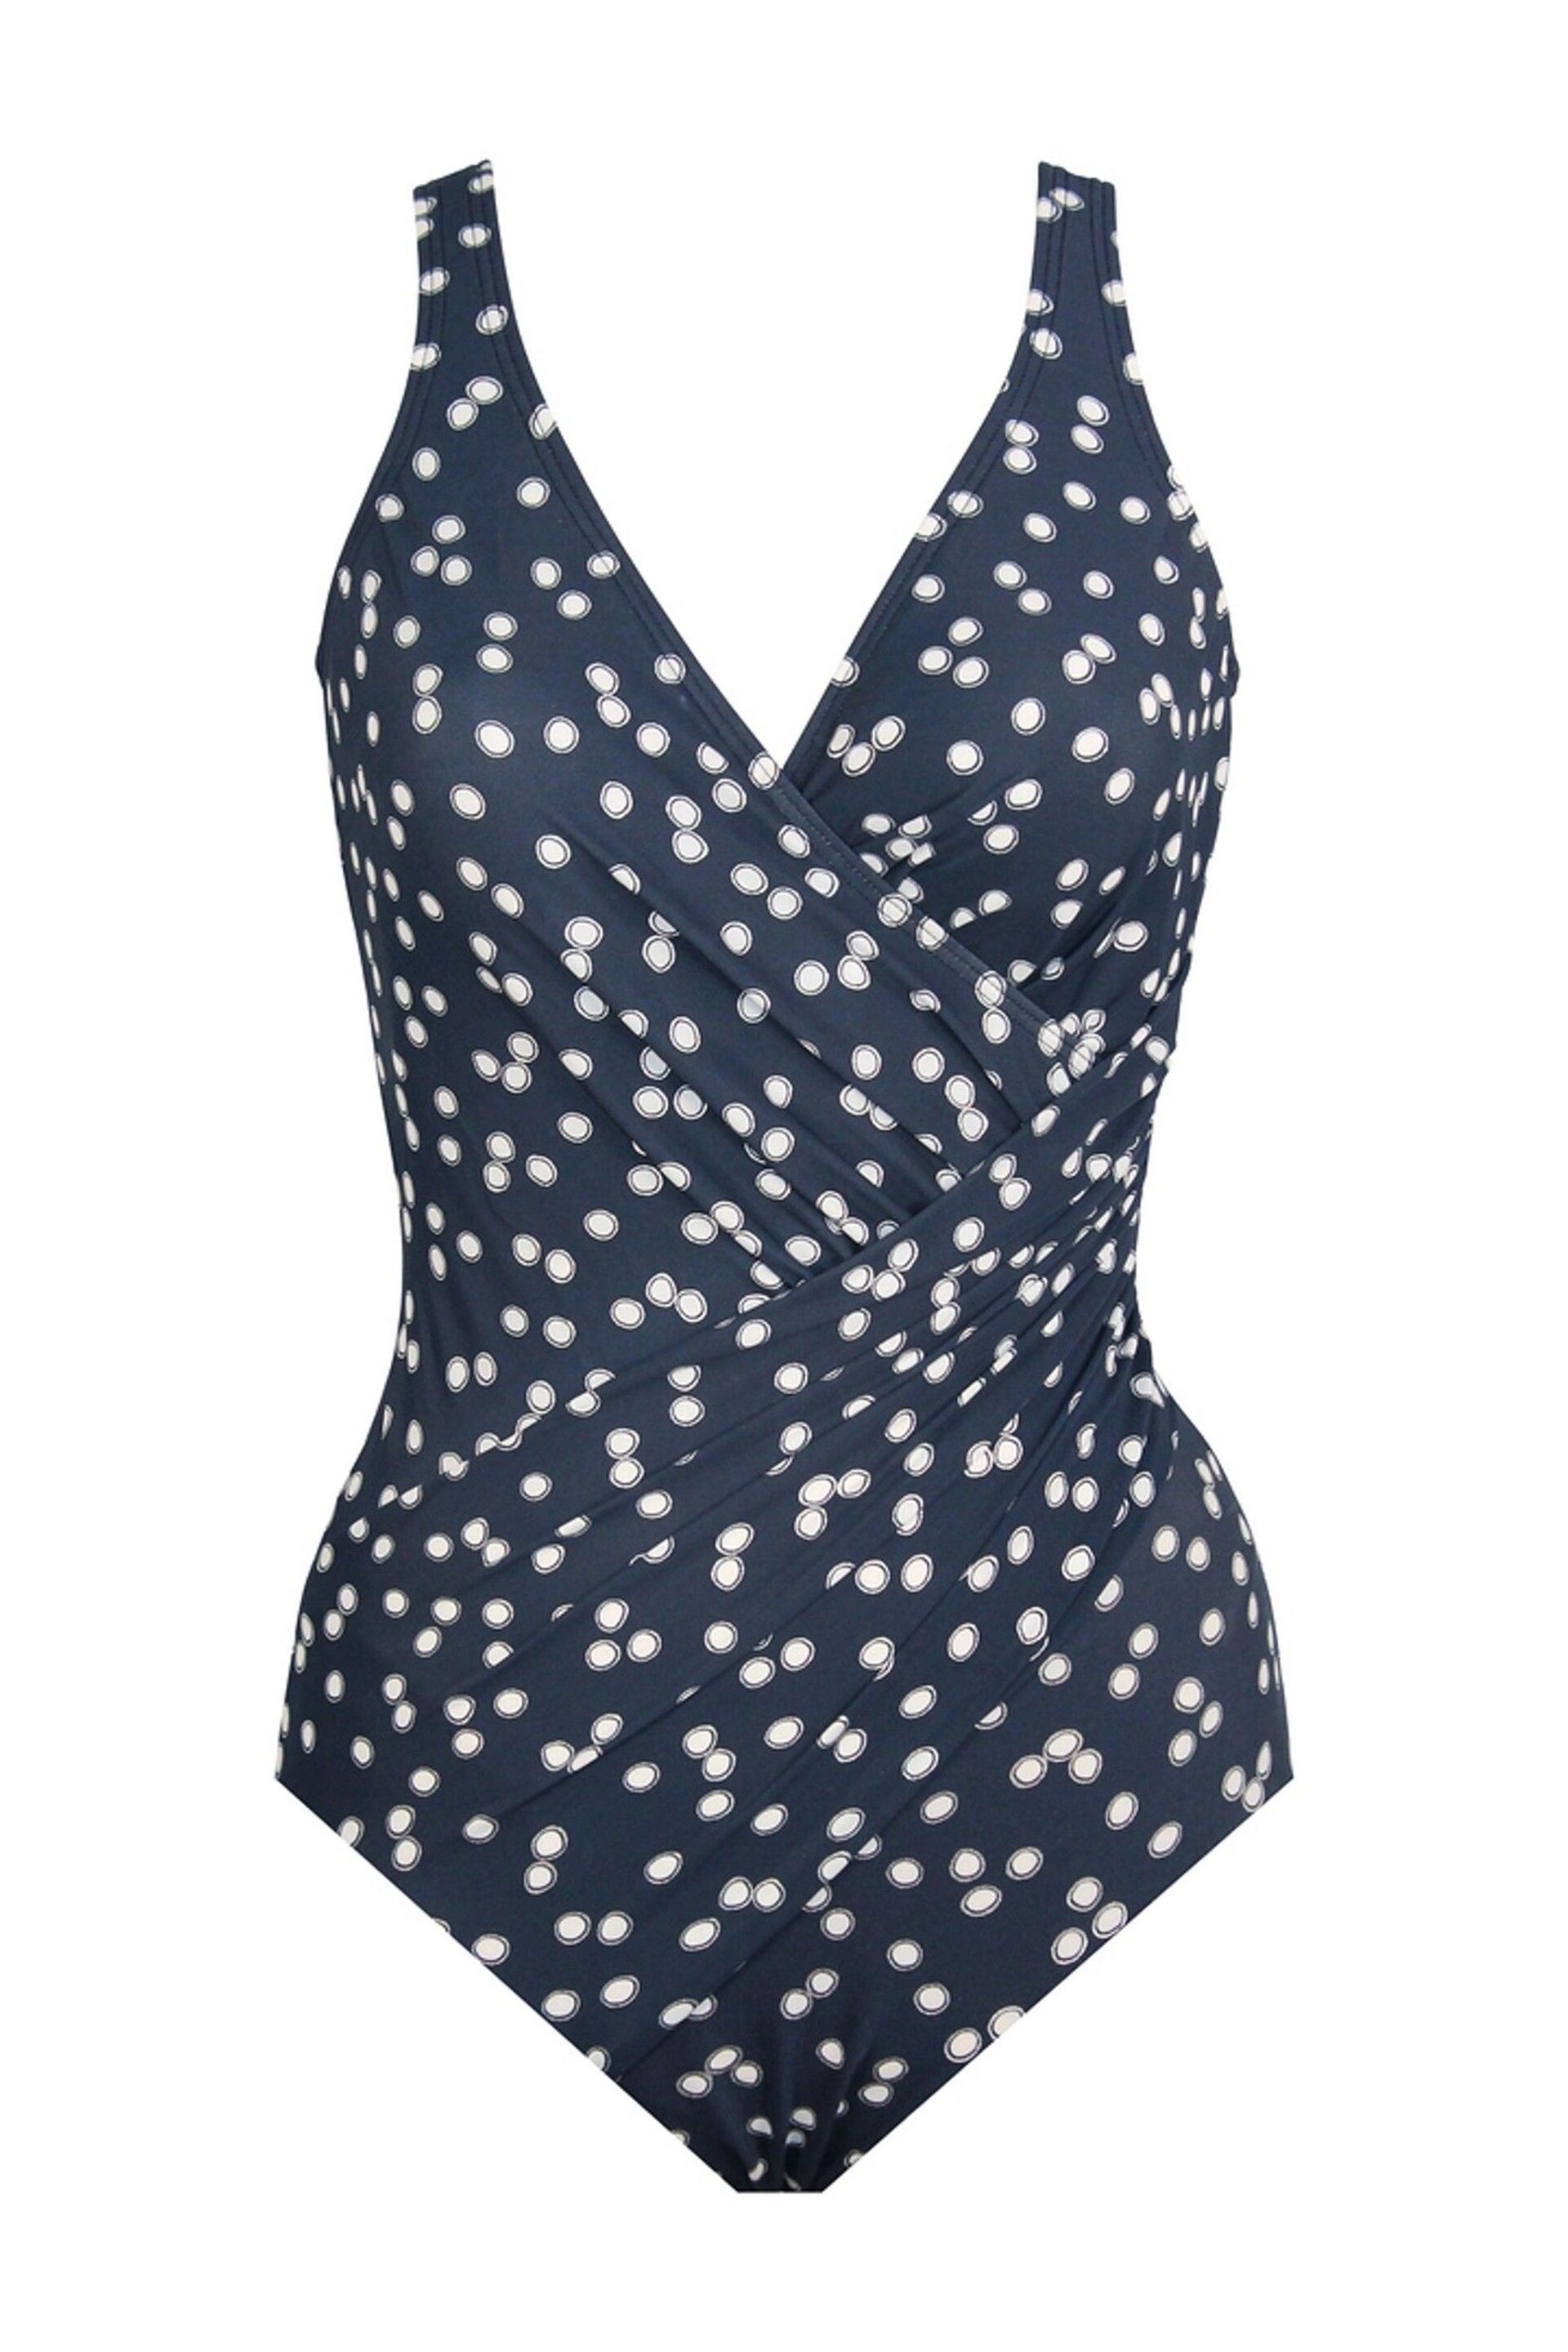 Miraclesuit Navy Tummy Control Oceanus Polka Dot Plunge Swimsuit - Image 5 of 5